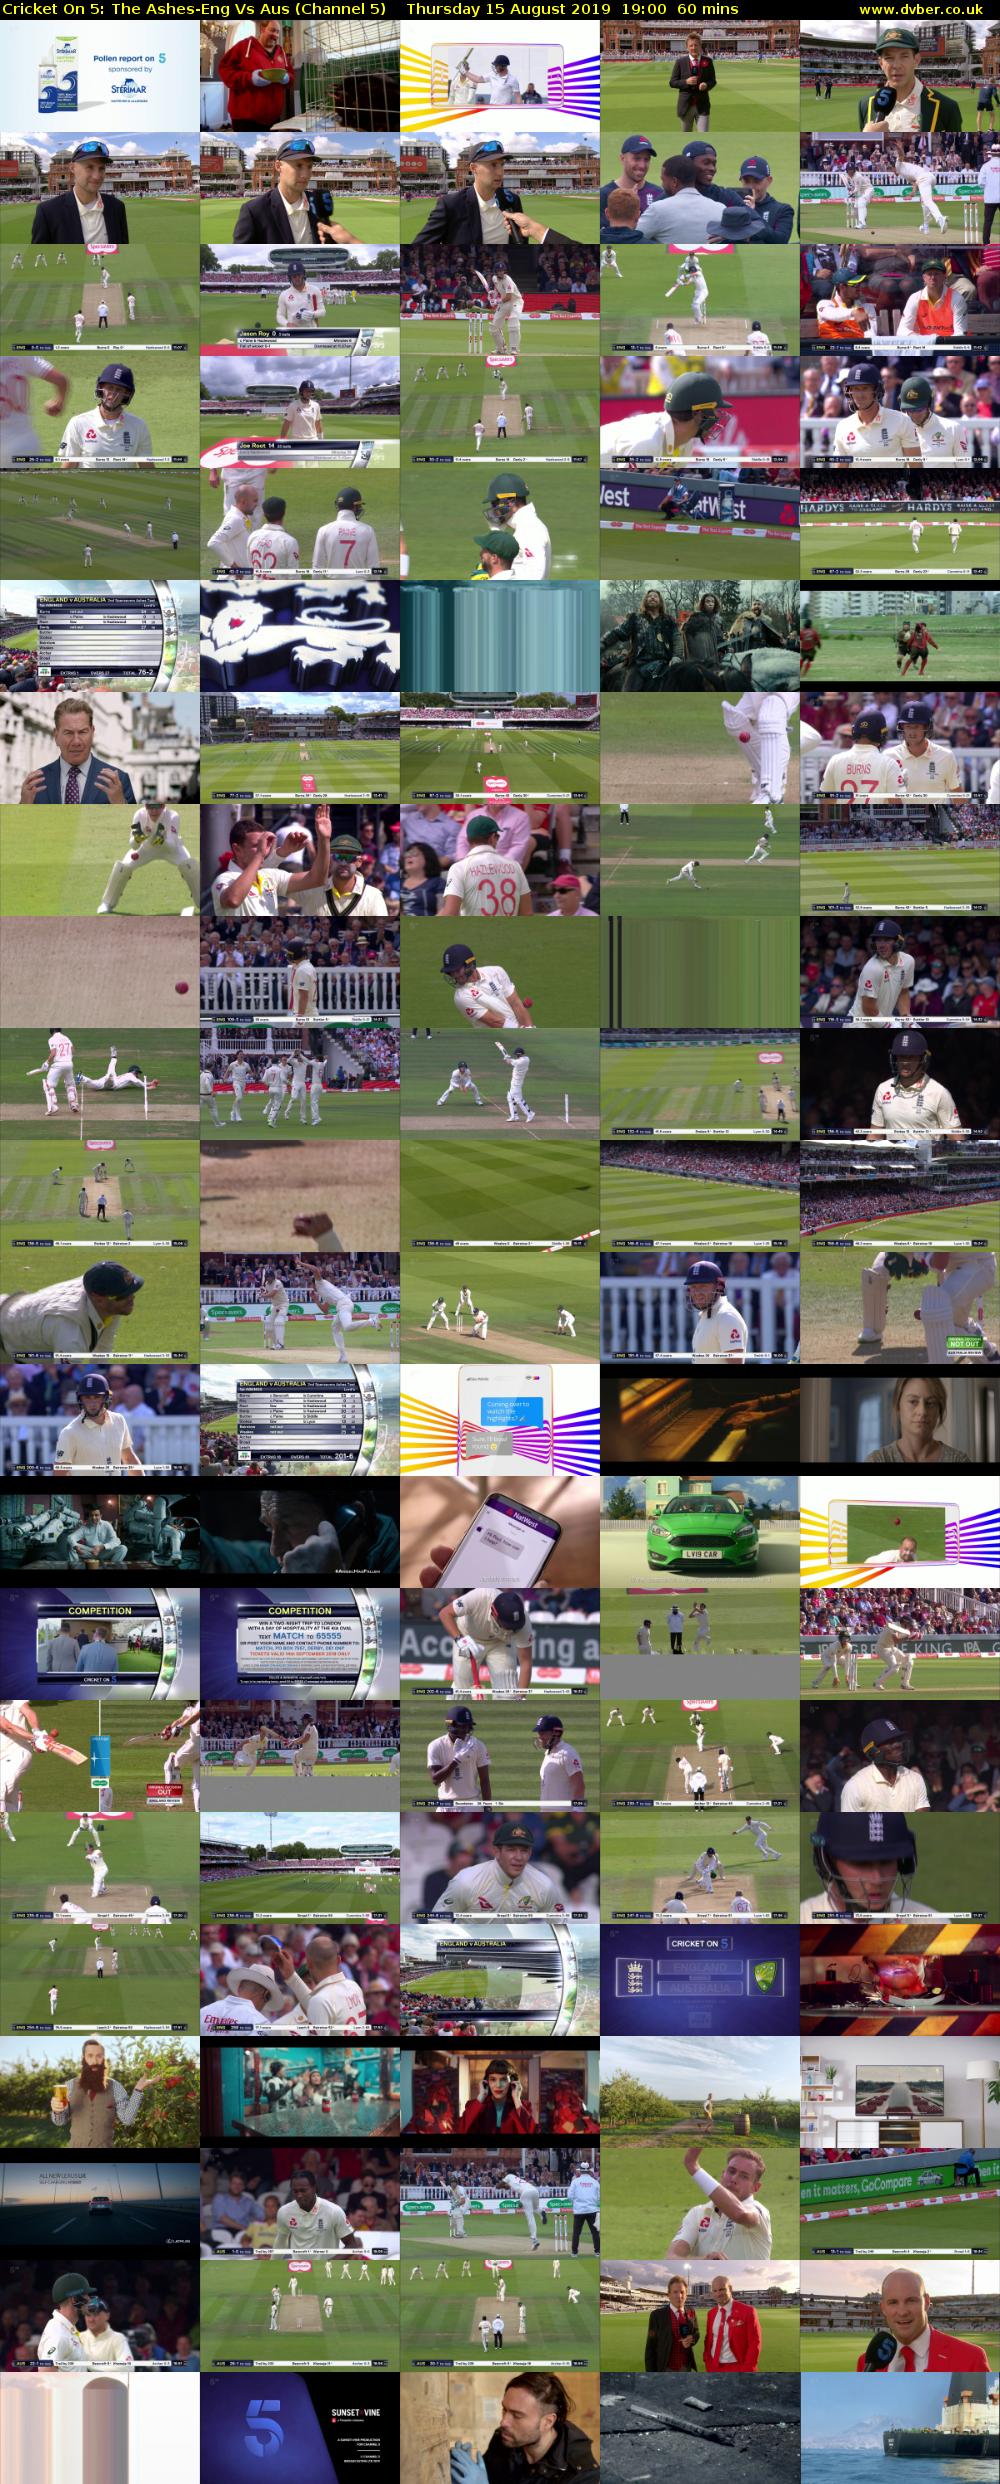 Cricket On 5: The Ashes-Eng Vs Aus (Channel 5) Thursday 15 August 2019 19:00 - 20:00